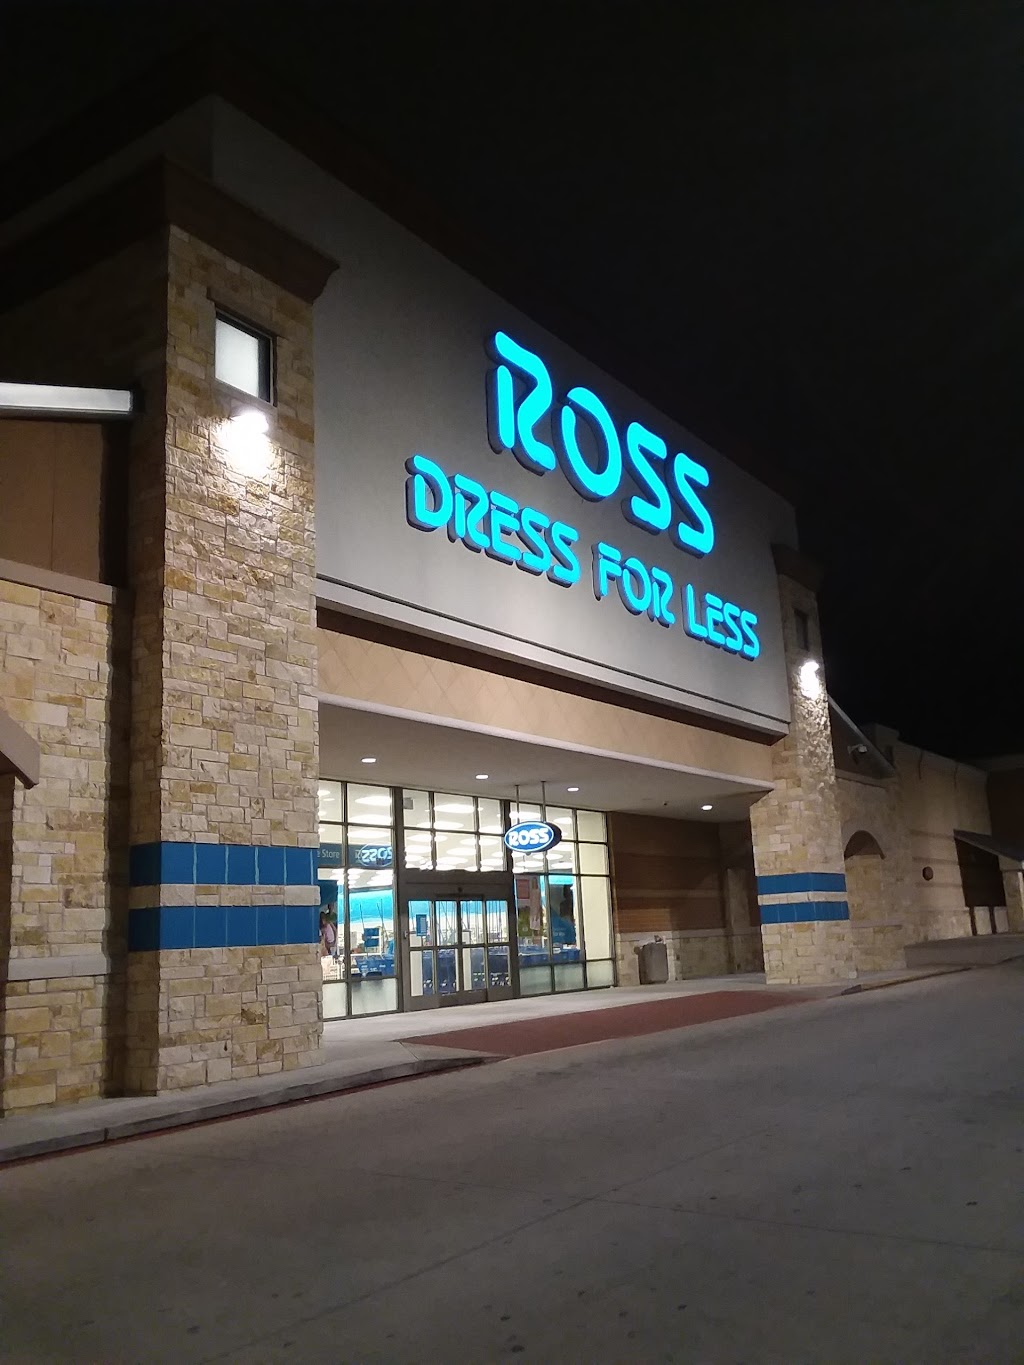 Ross Dress for Less | 18700 Limestone Commercial Dr, Pflugerville, TX 78660 | Phone: (512) 670-3355